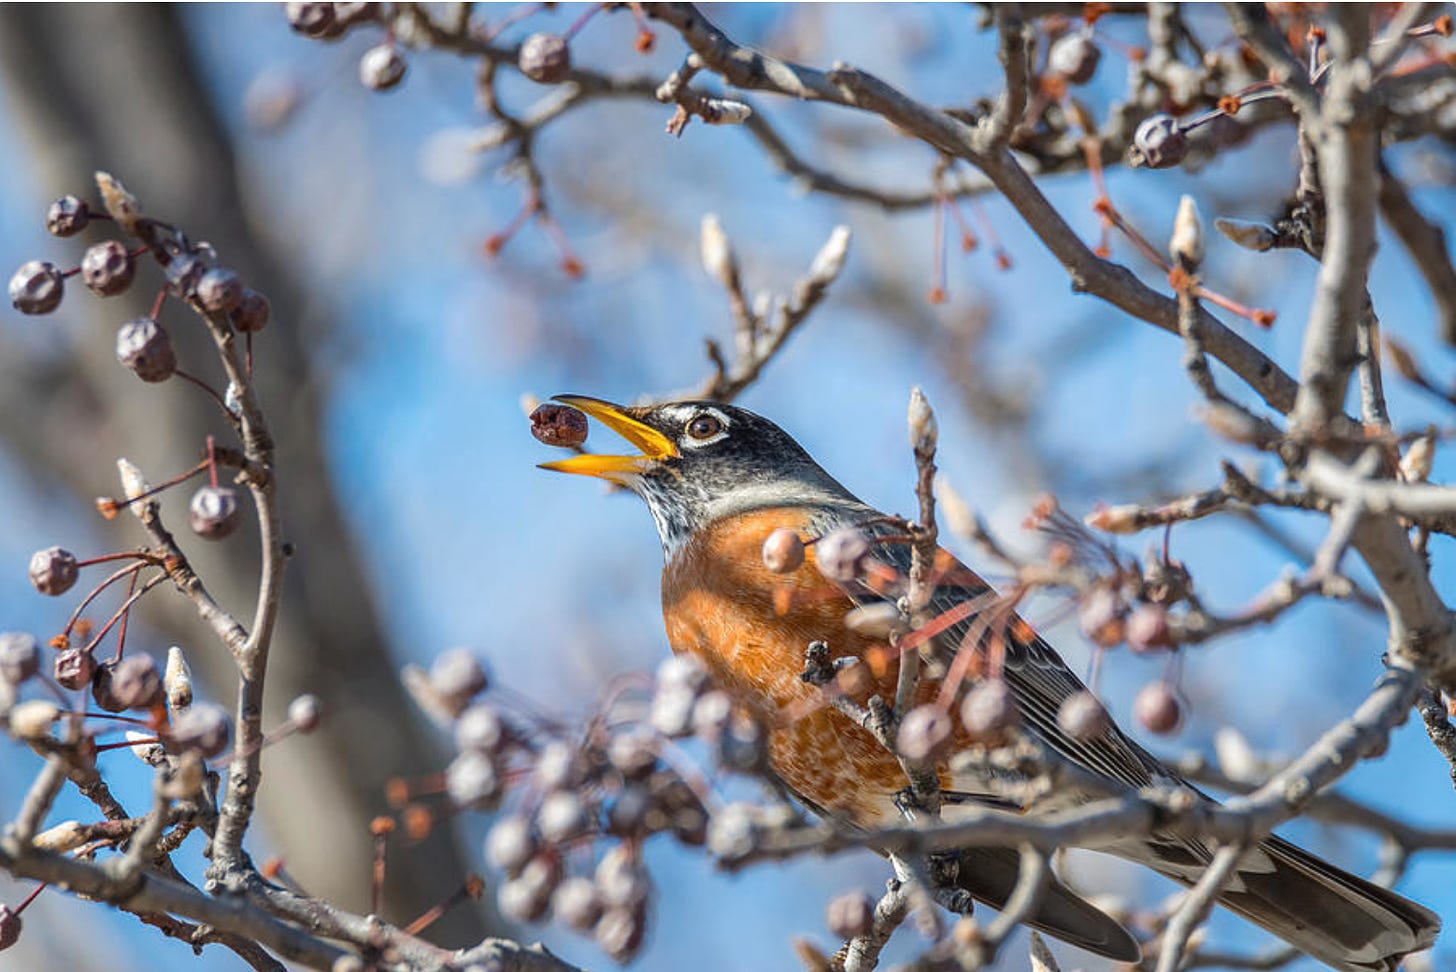 American robin tossing back a Bradford pear berry